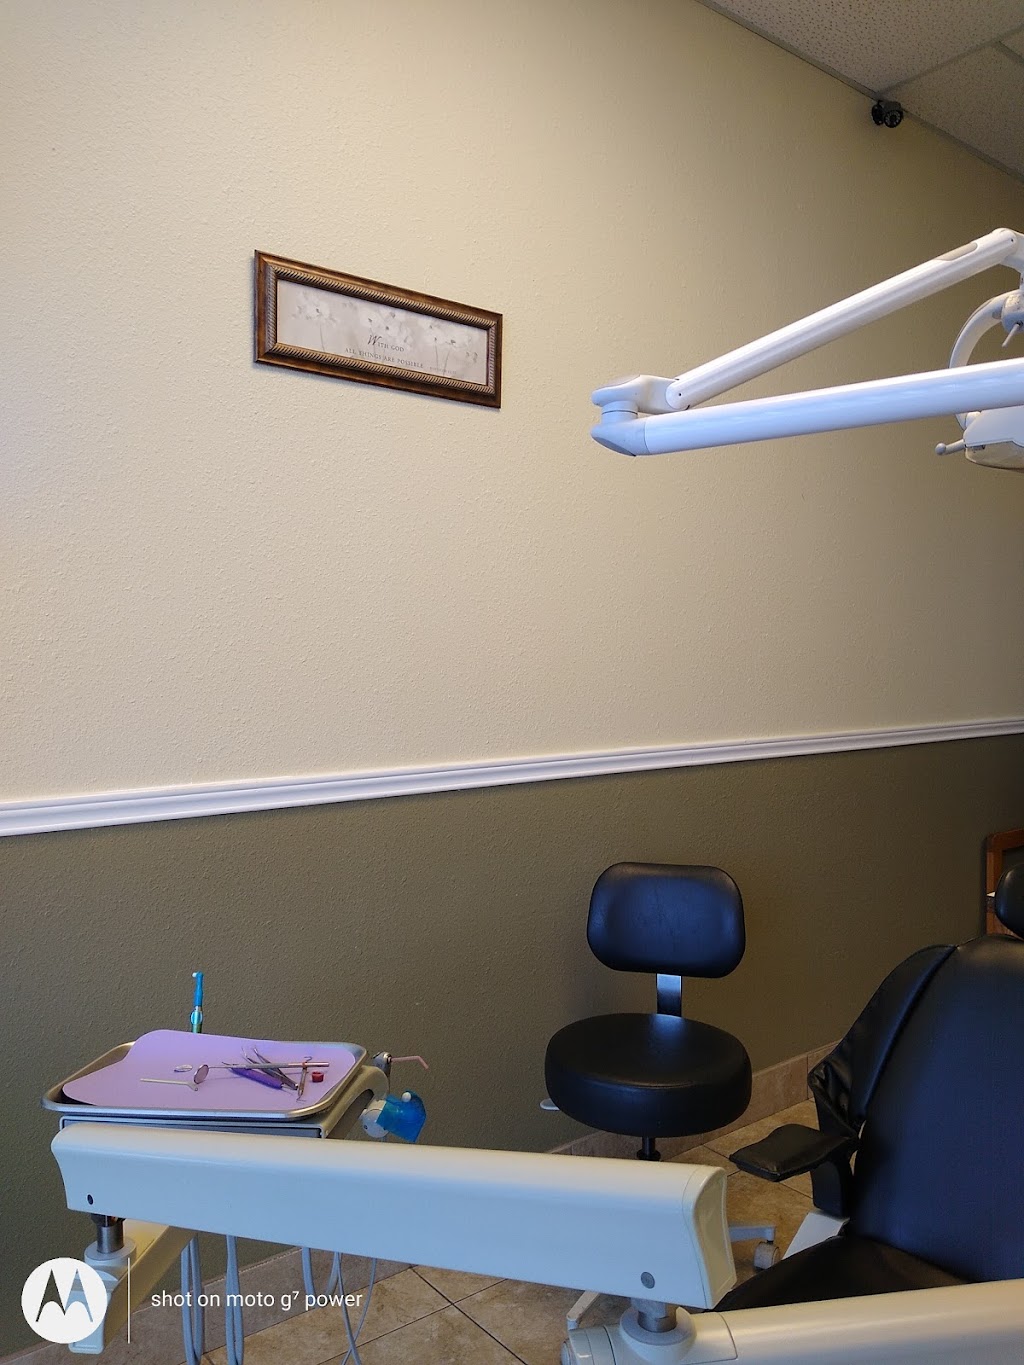 Ah! Dentistry - Ft. Worth, TX | 6619 Forest Hill Dr #55, Forest Hill, TX 76140, USA | Phone: (817) 483-0188